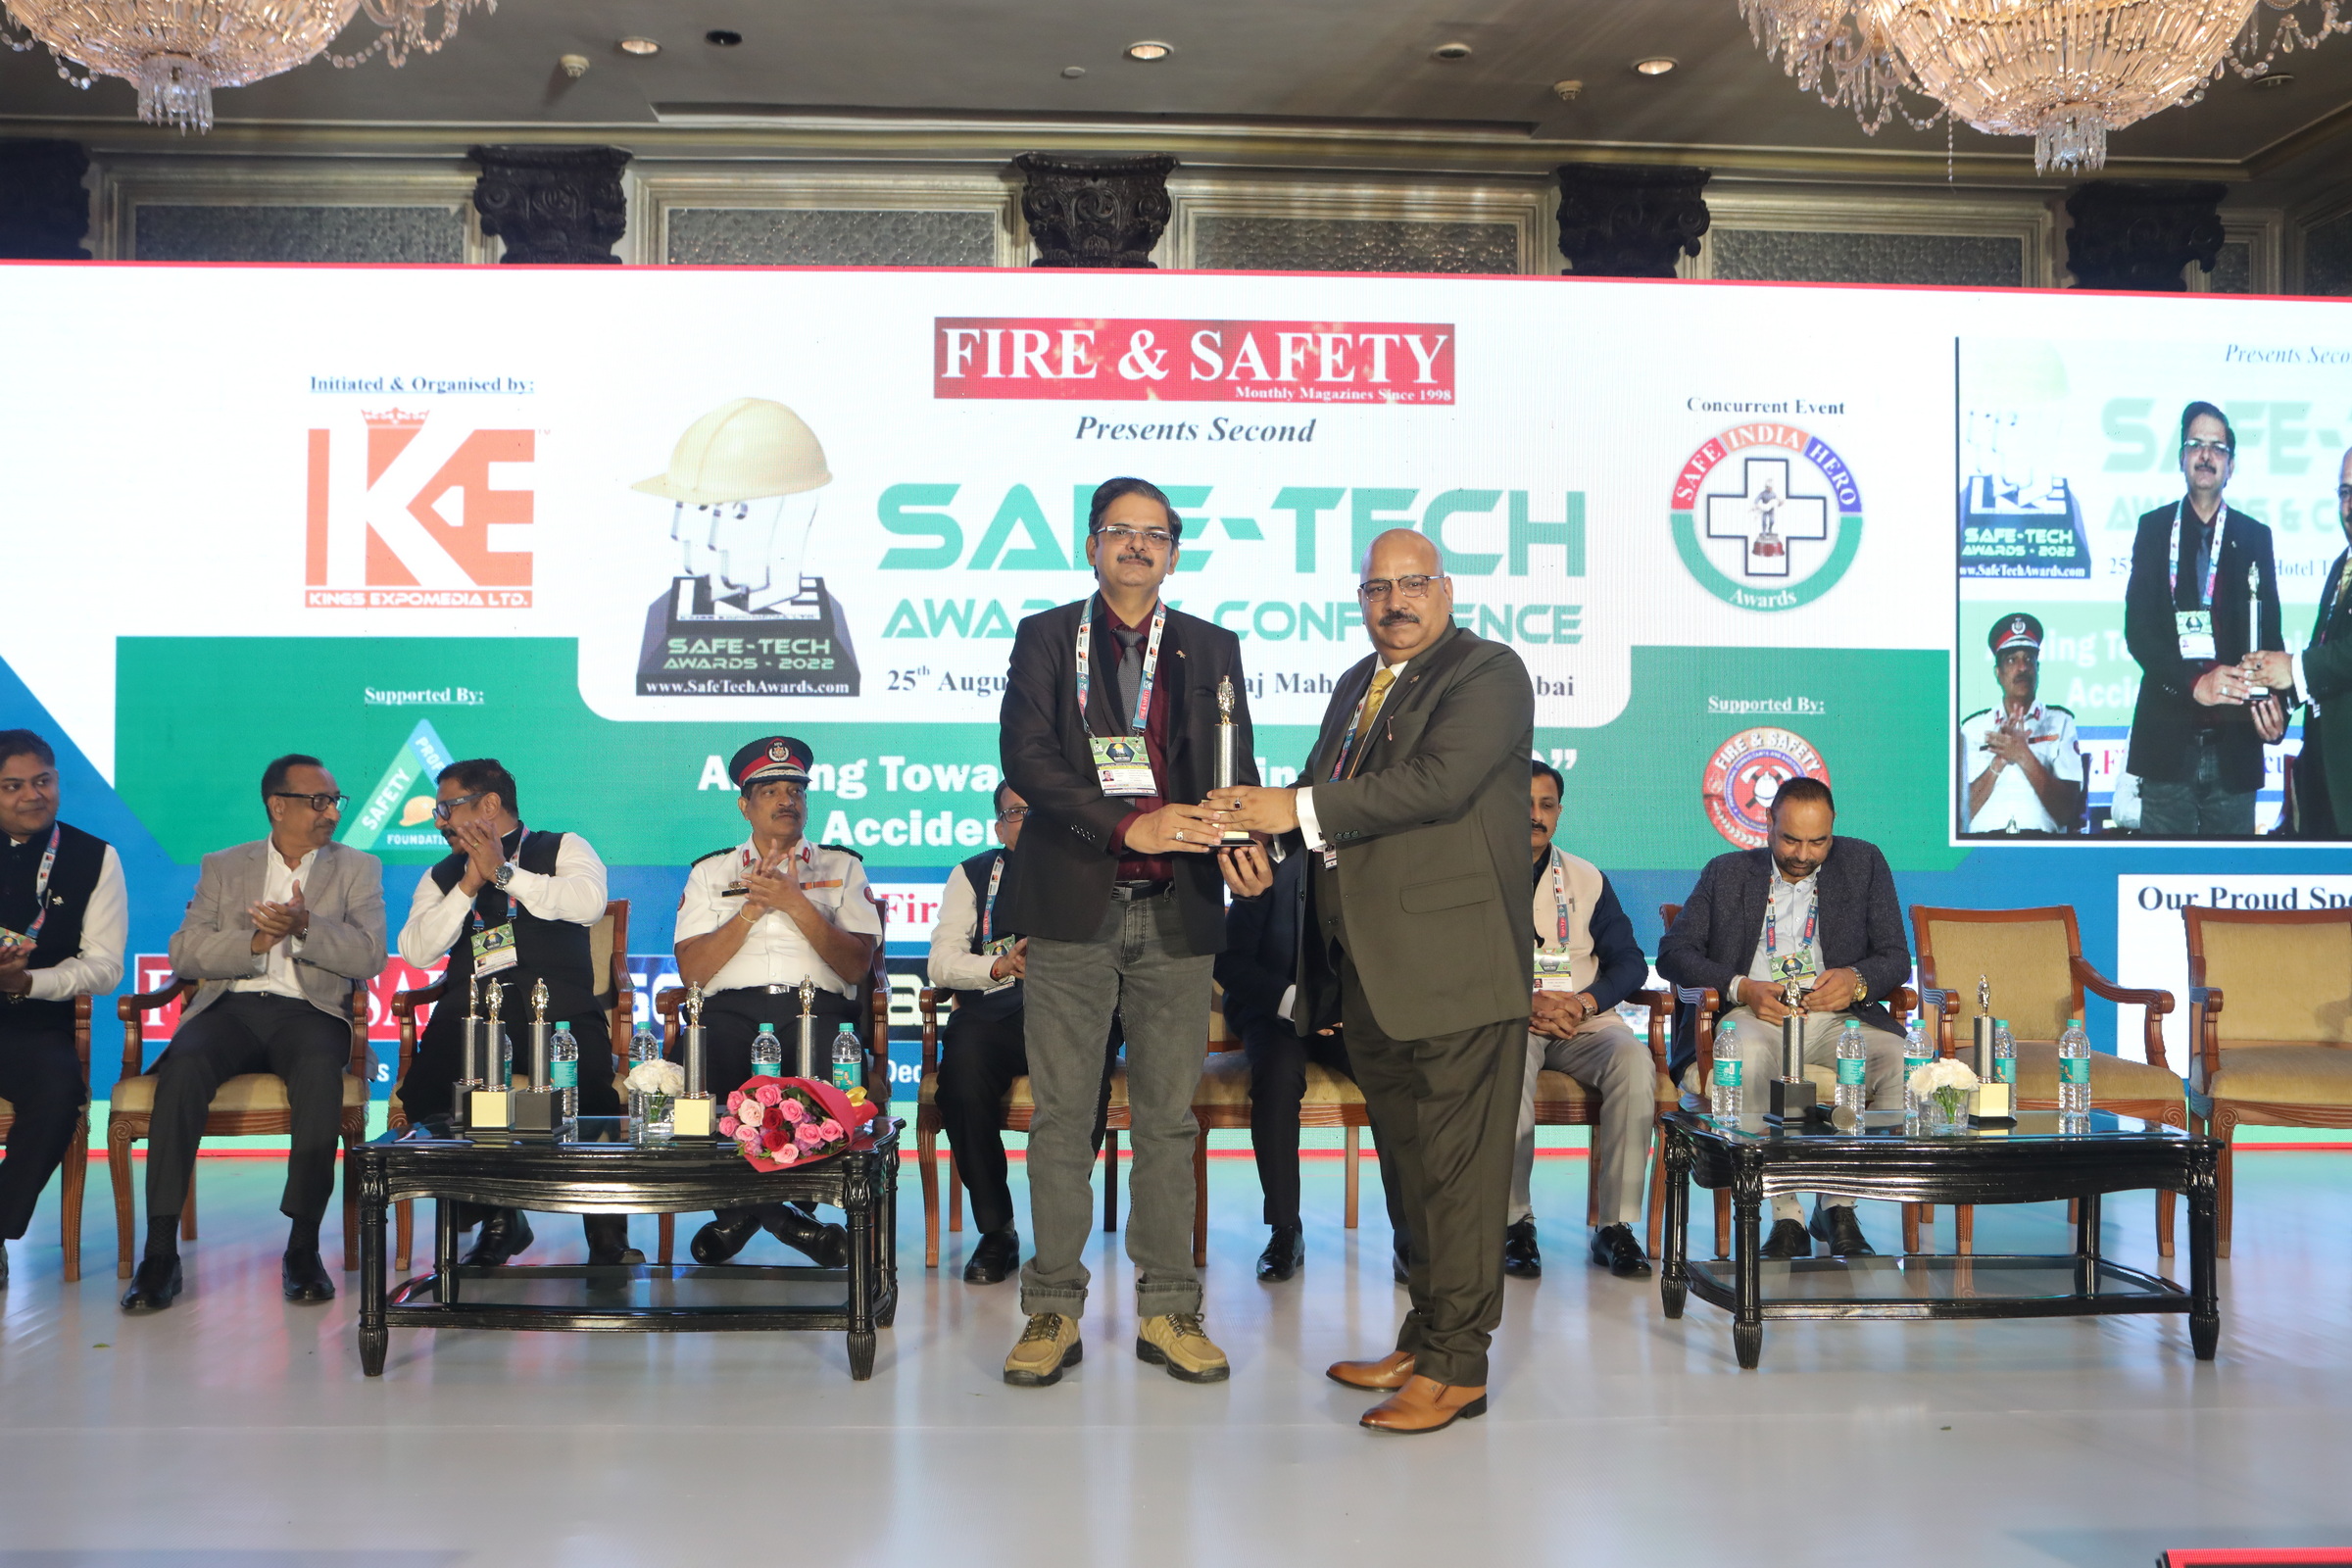 APSEZ fire services team awarded two national level awards in Safe-Tech awards & conference